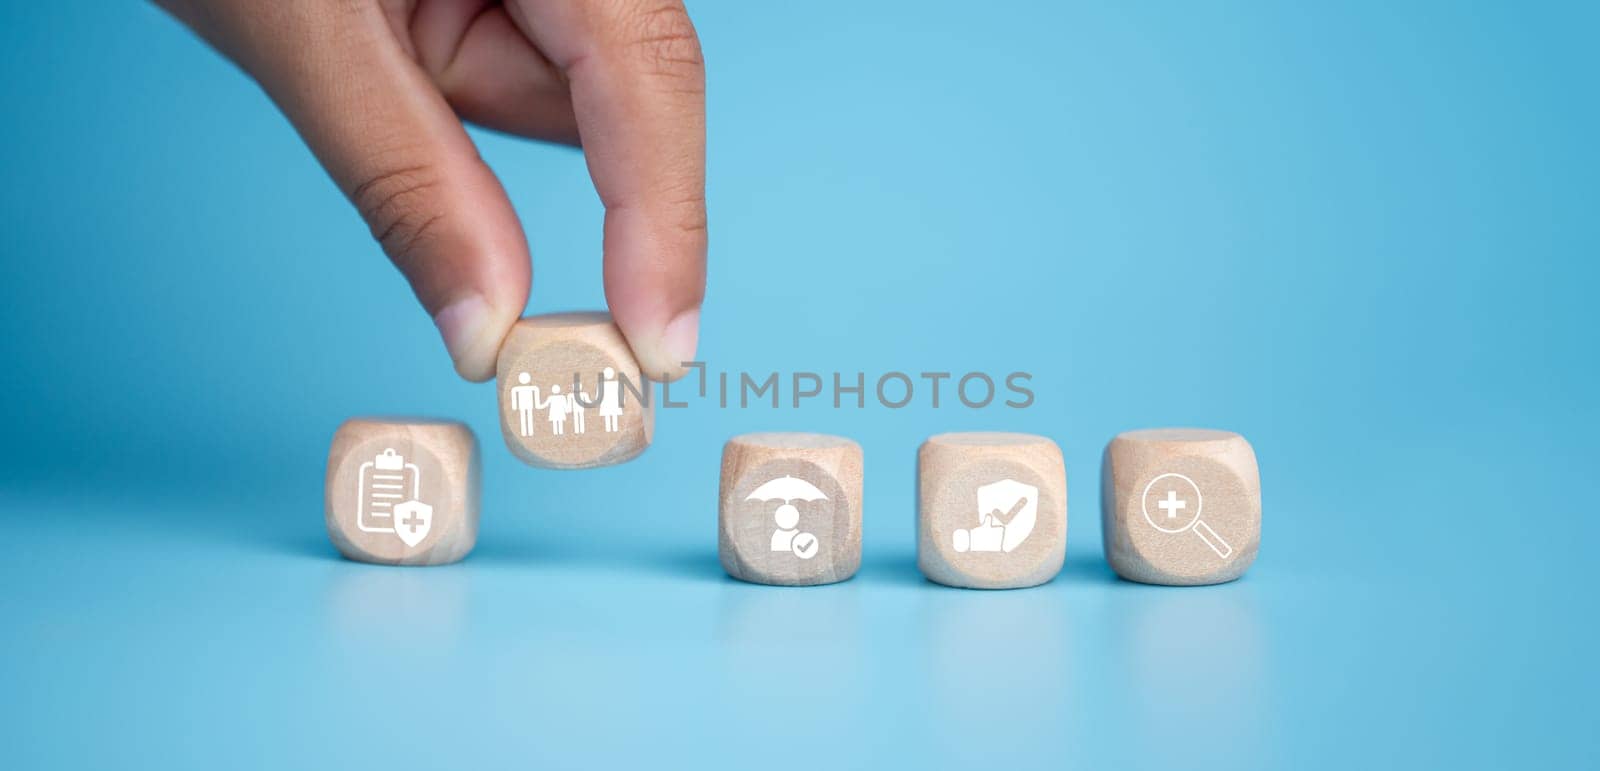 Health insurance and healthcare concept, human hand holds wooden block with icons about health insurance and healthcare access, retirement planning on blue background. by Unimages2527